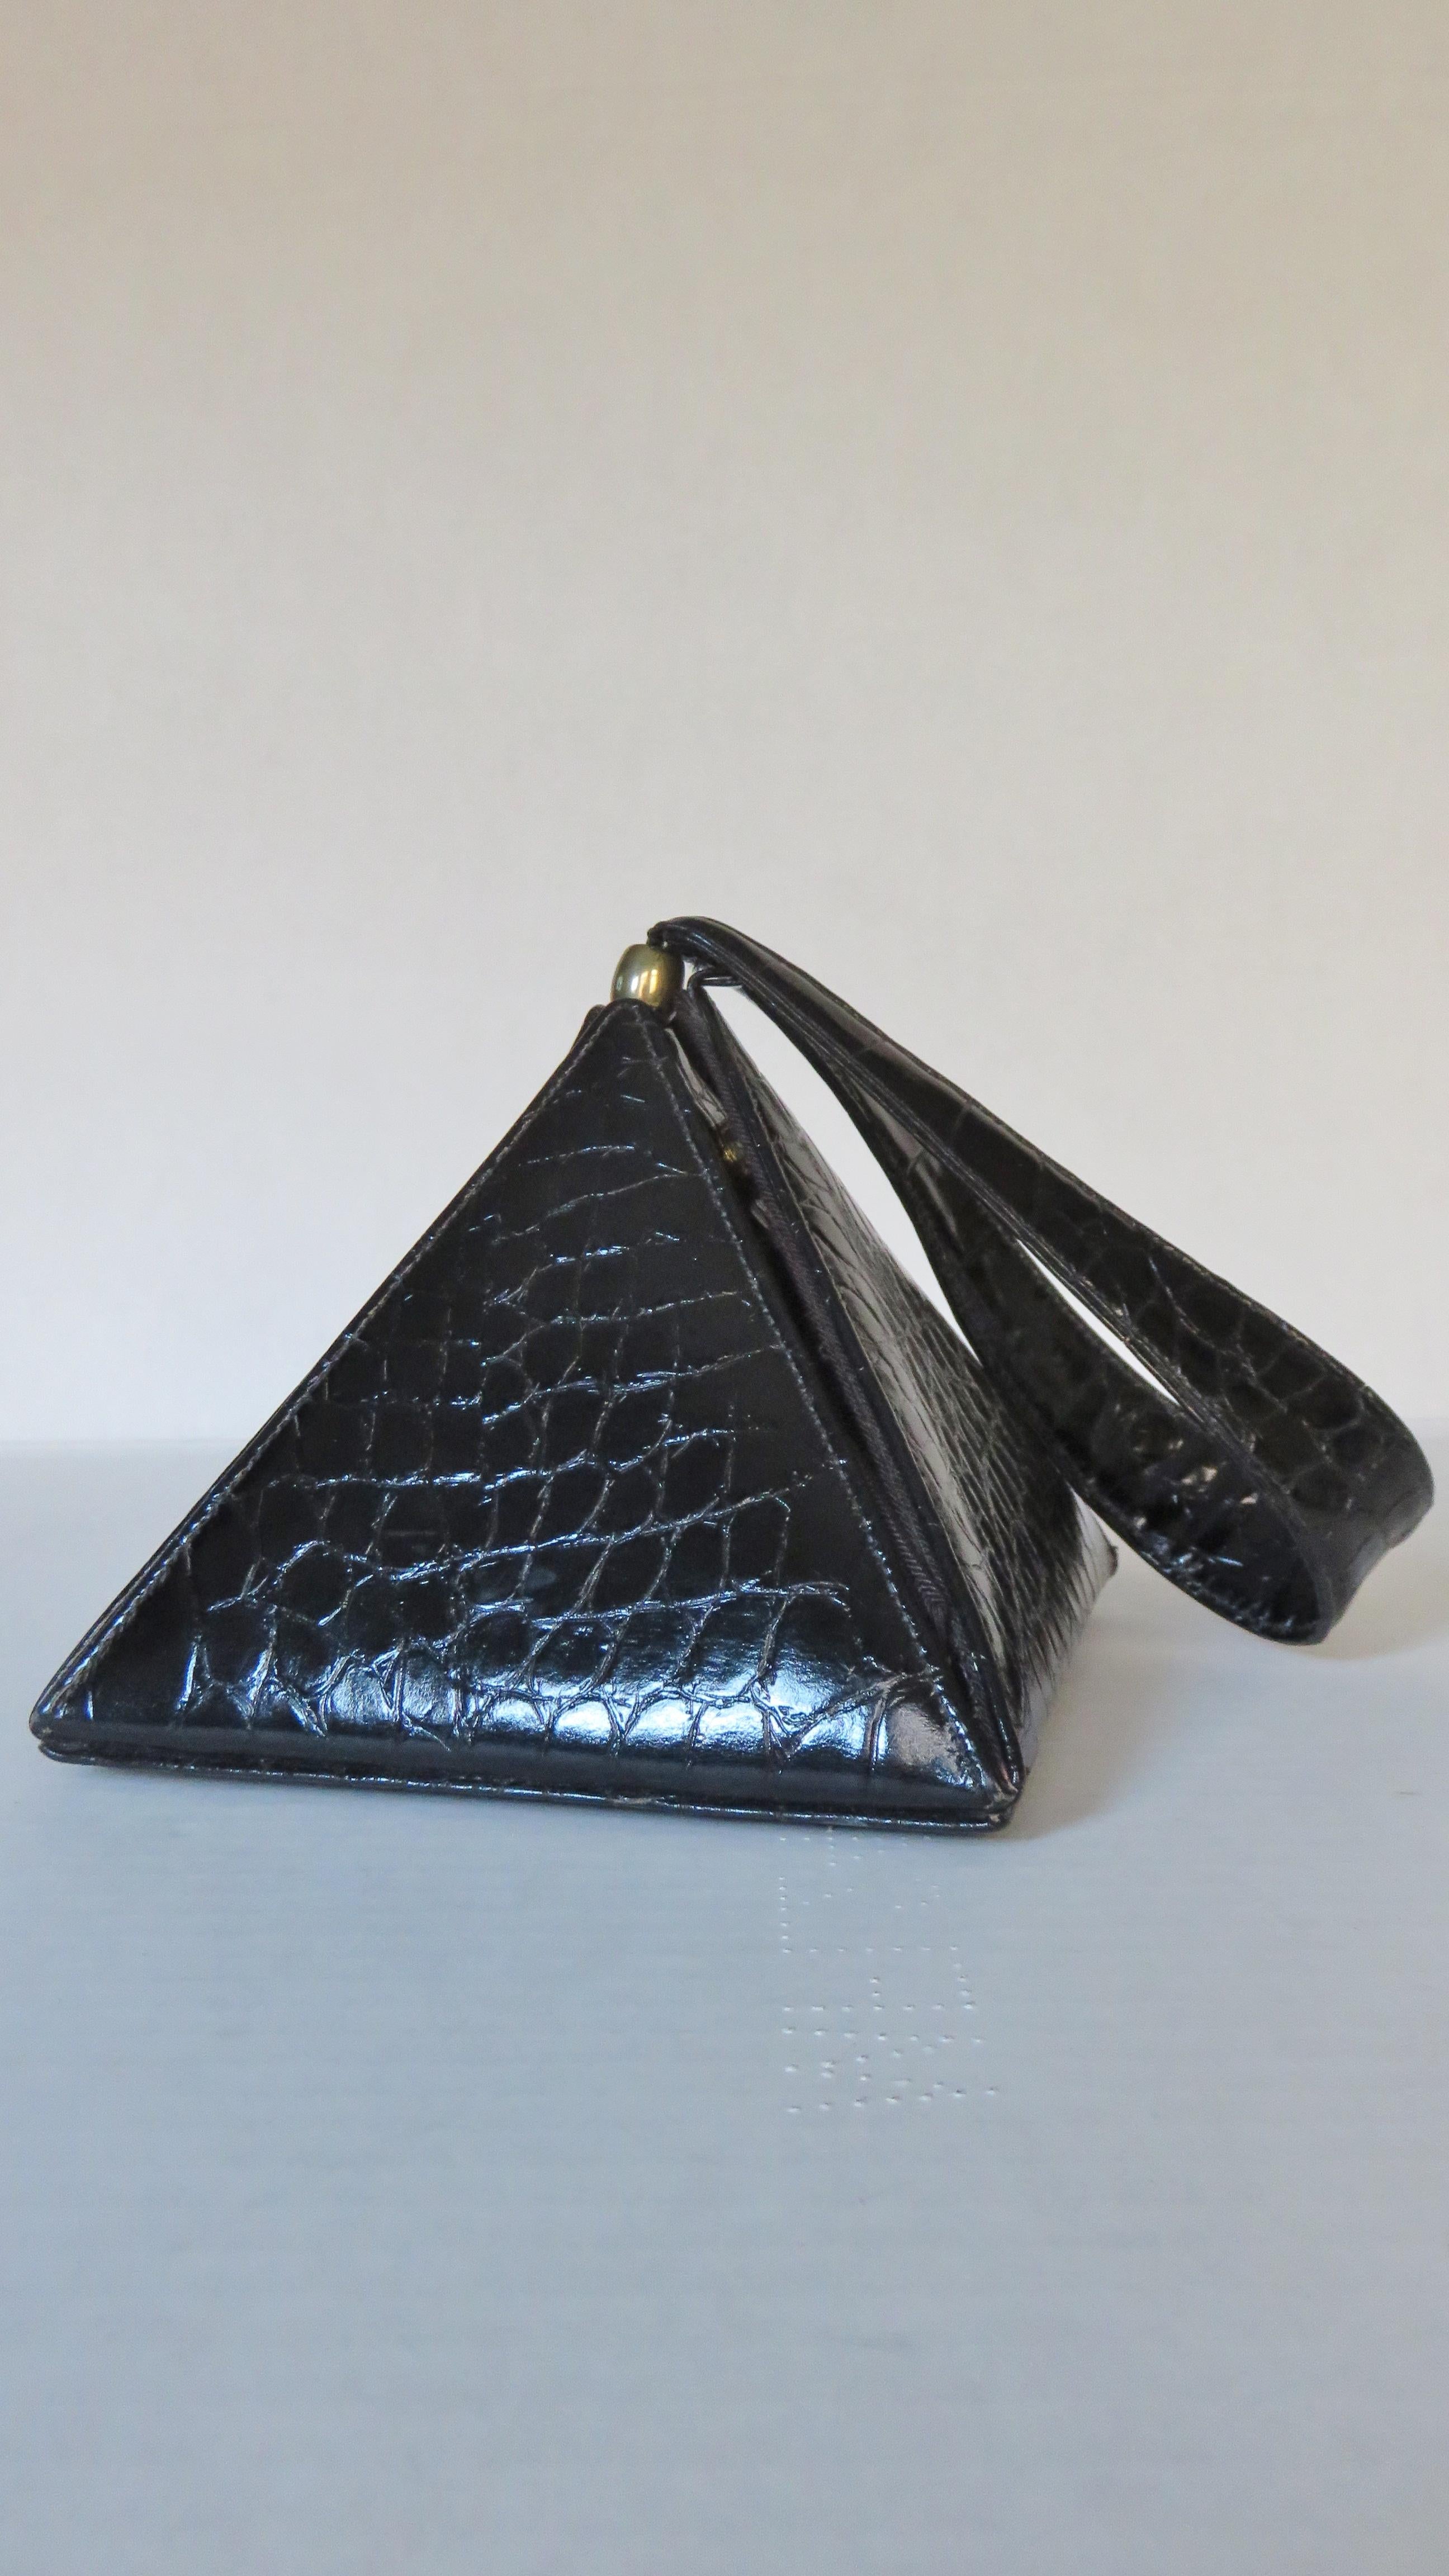 A gorgeous alligator embossed black leather triangular box handbag from Carey Adina.  It has 4 triangular panels emanating from a square base with small gold feet. One of these panels opens with a small tab and magnetically snaps closed.  It has a